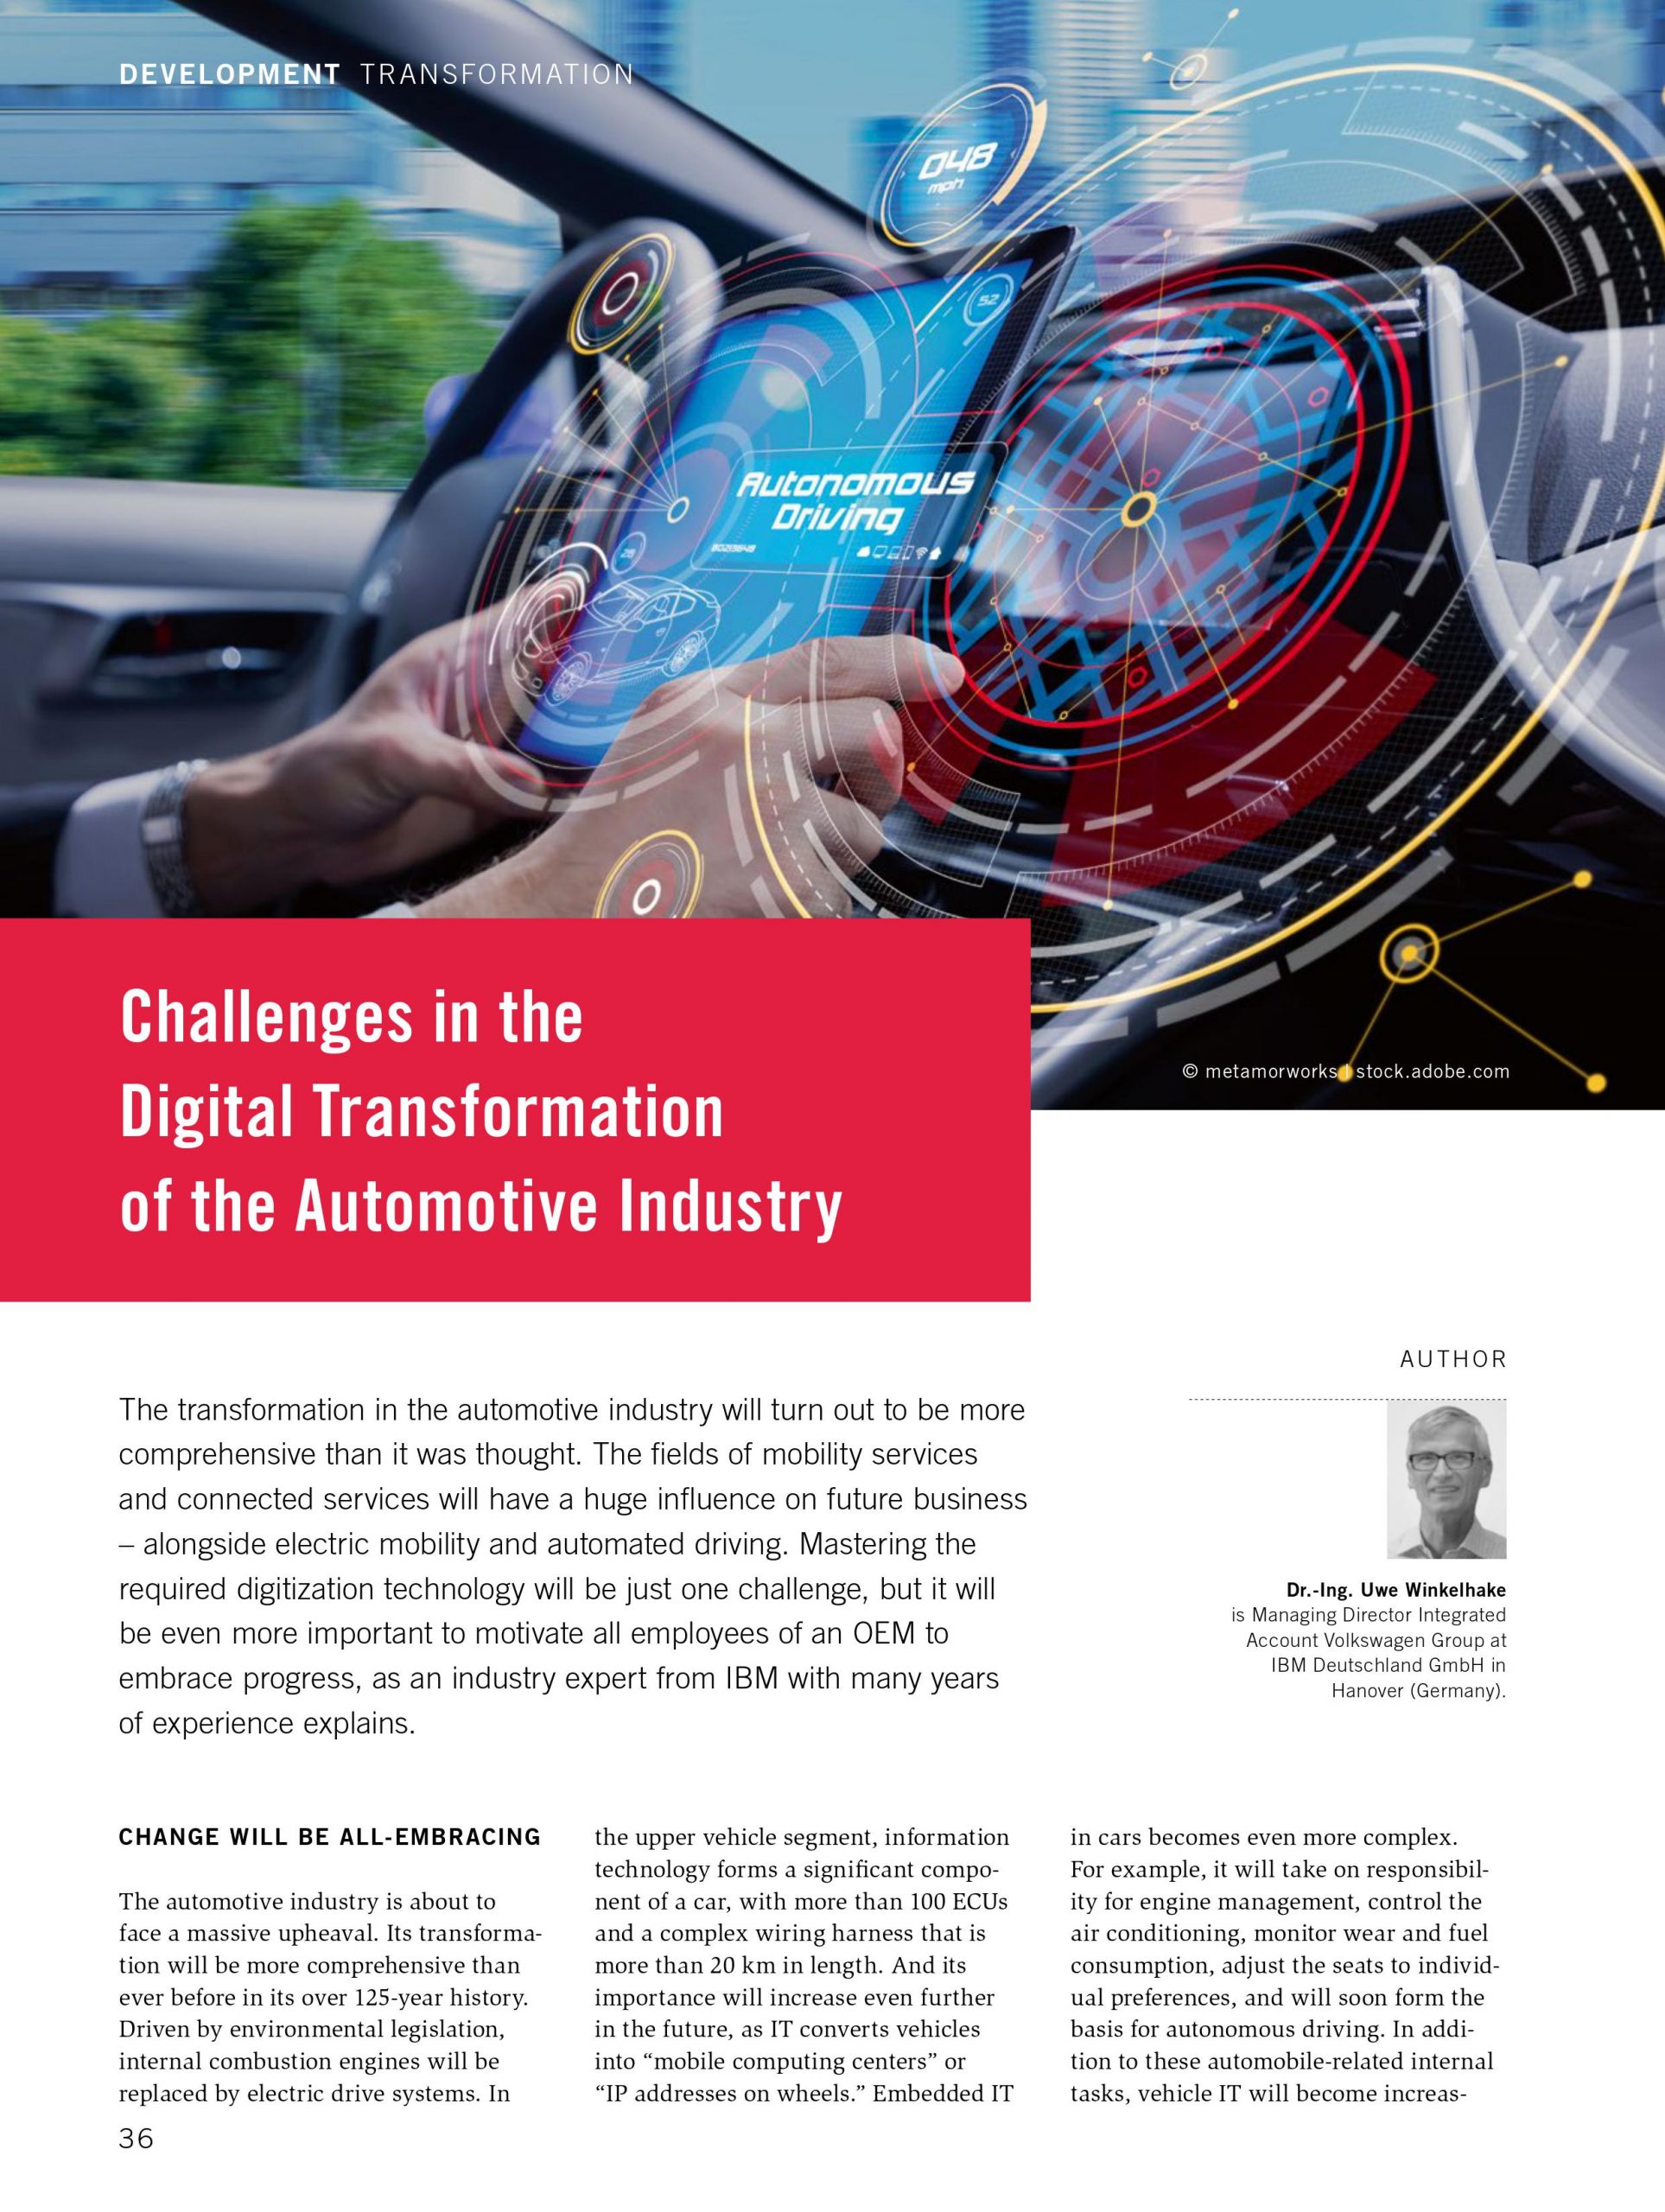 Challenges in the Digital Transformation of the Automotive Industry